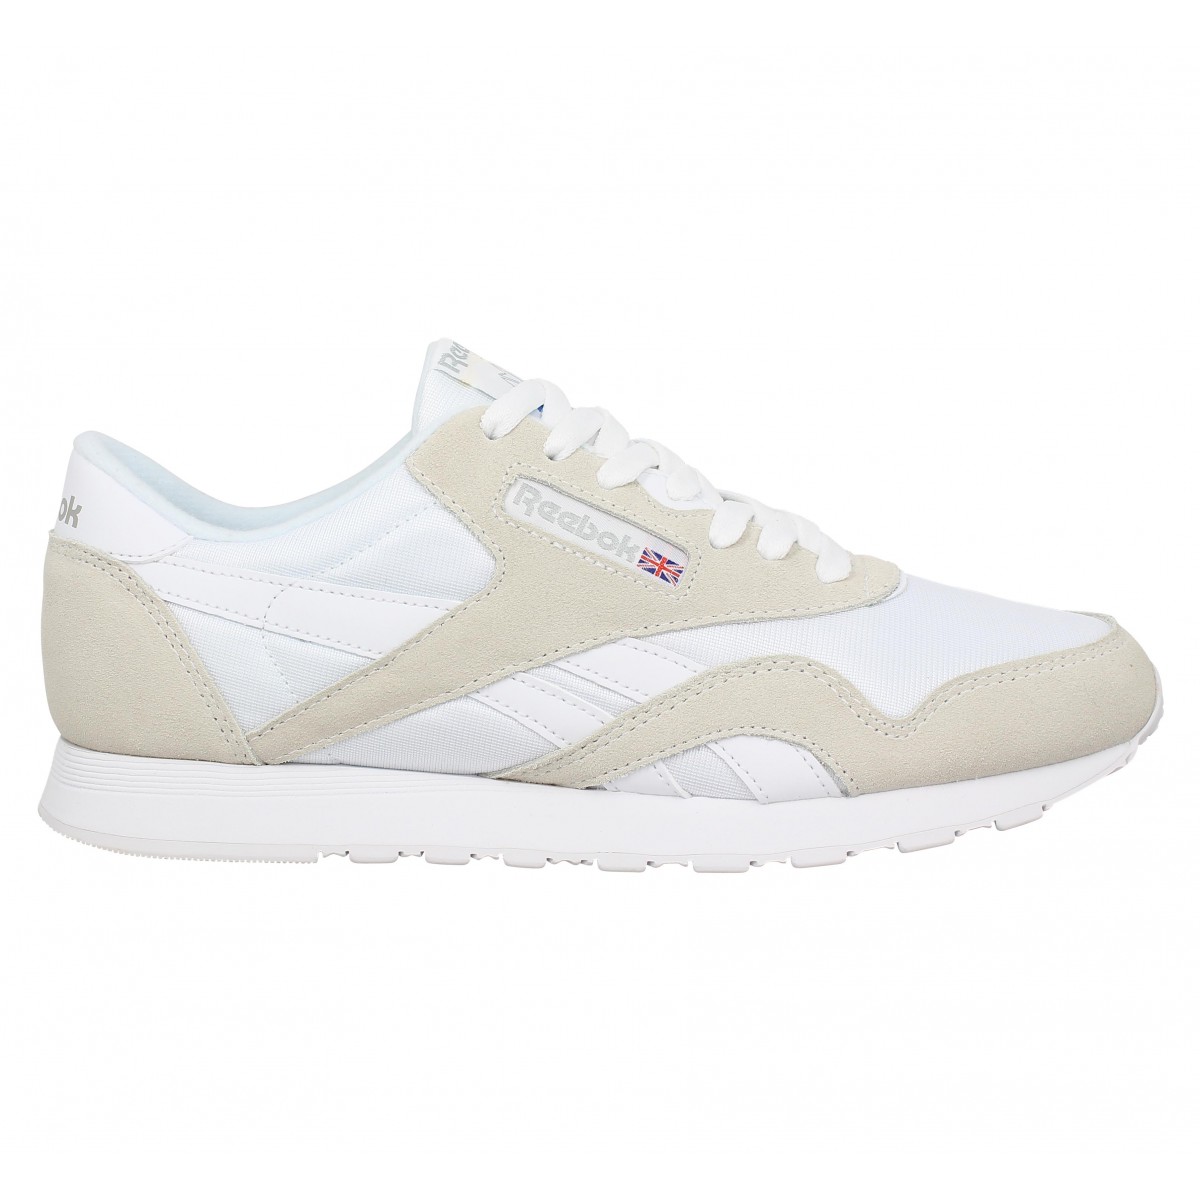 Reebok toile homme blanc homme | Fanny chaussures